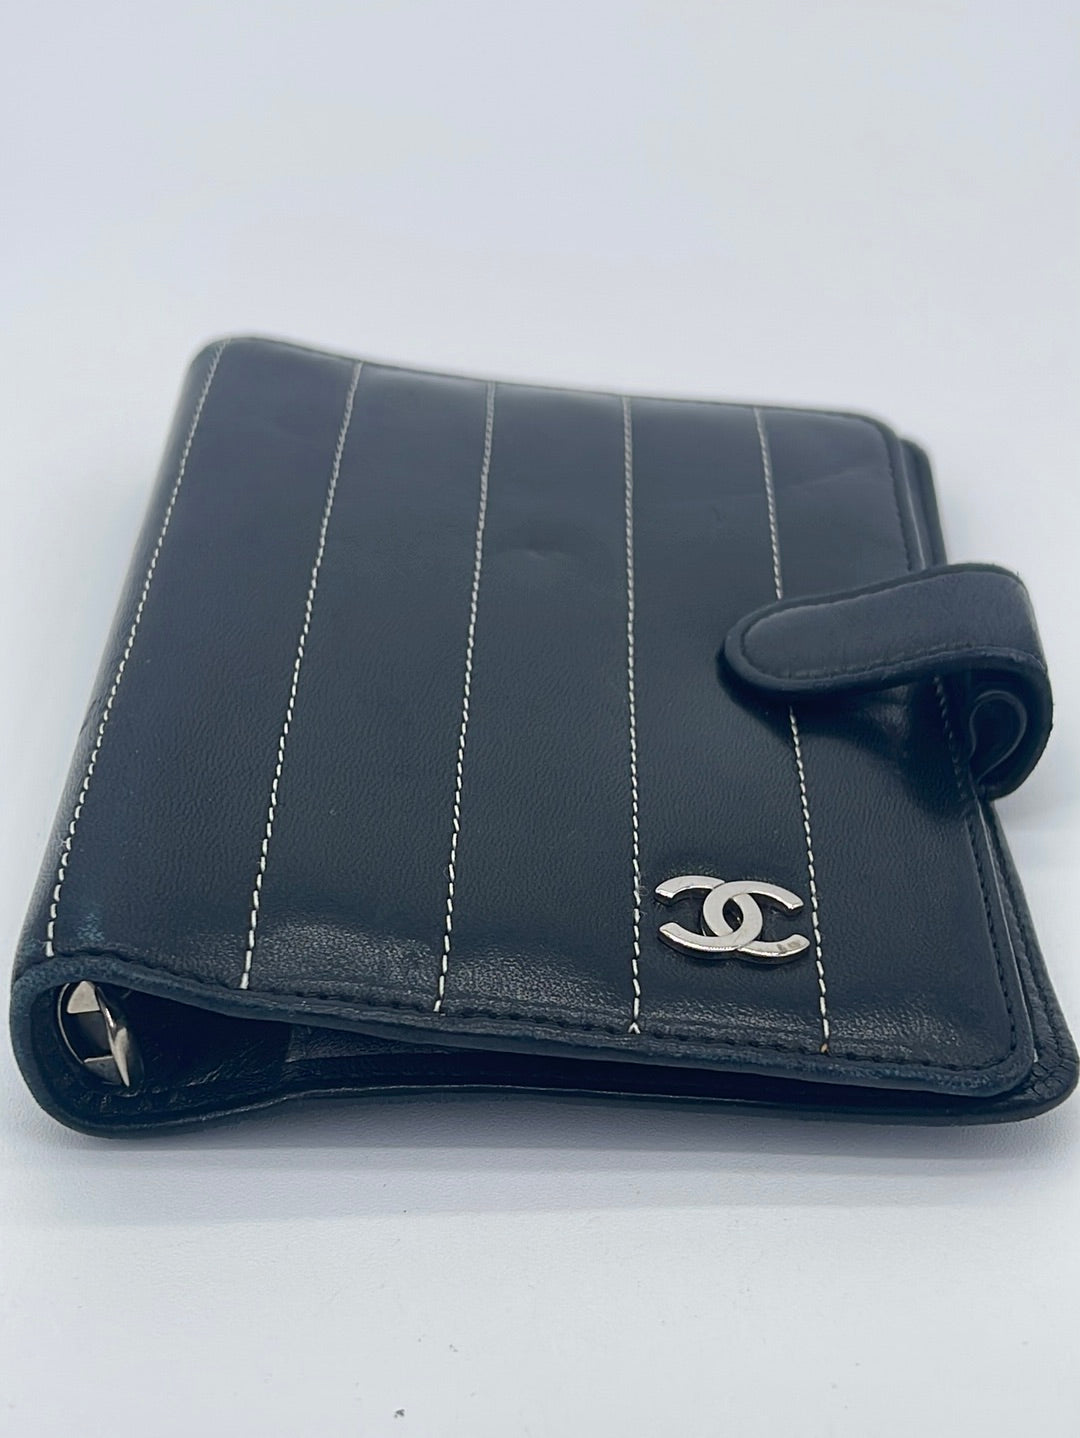 Preloved CHANEL Black Leather Agenda Notebook Cover 10399342 052223 - 125  OFF LIVE SHOW